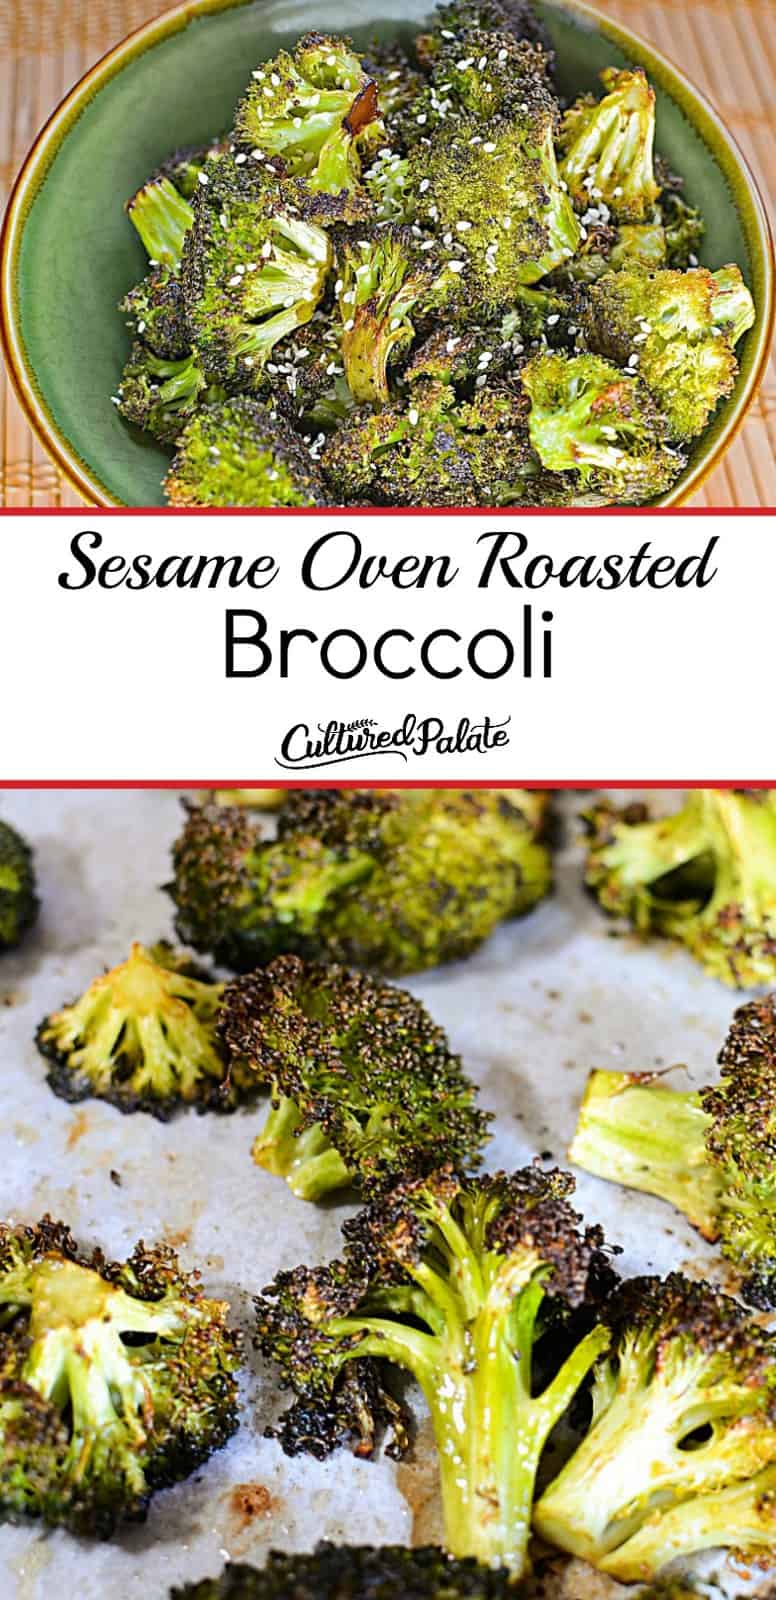 Oven Roasted Broccoli shown made in green bowl from overhead and on baking sheet with text overlay.